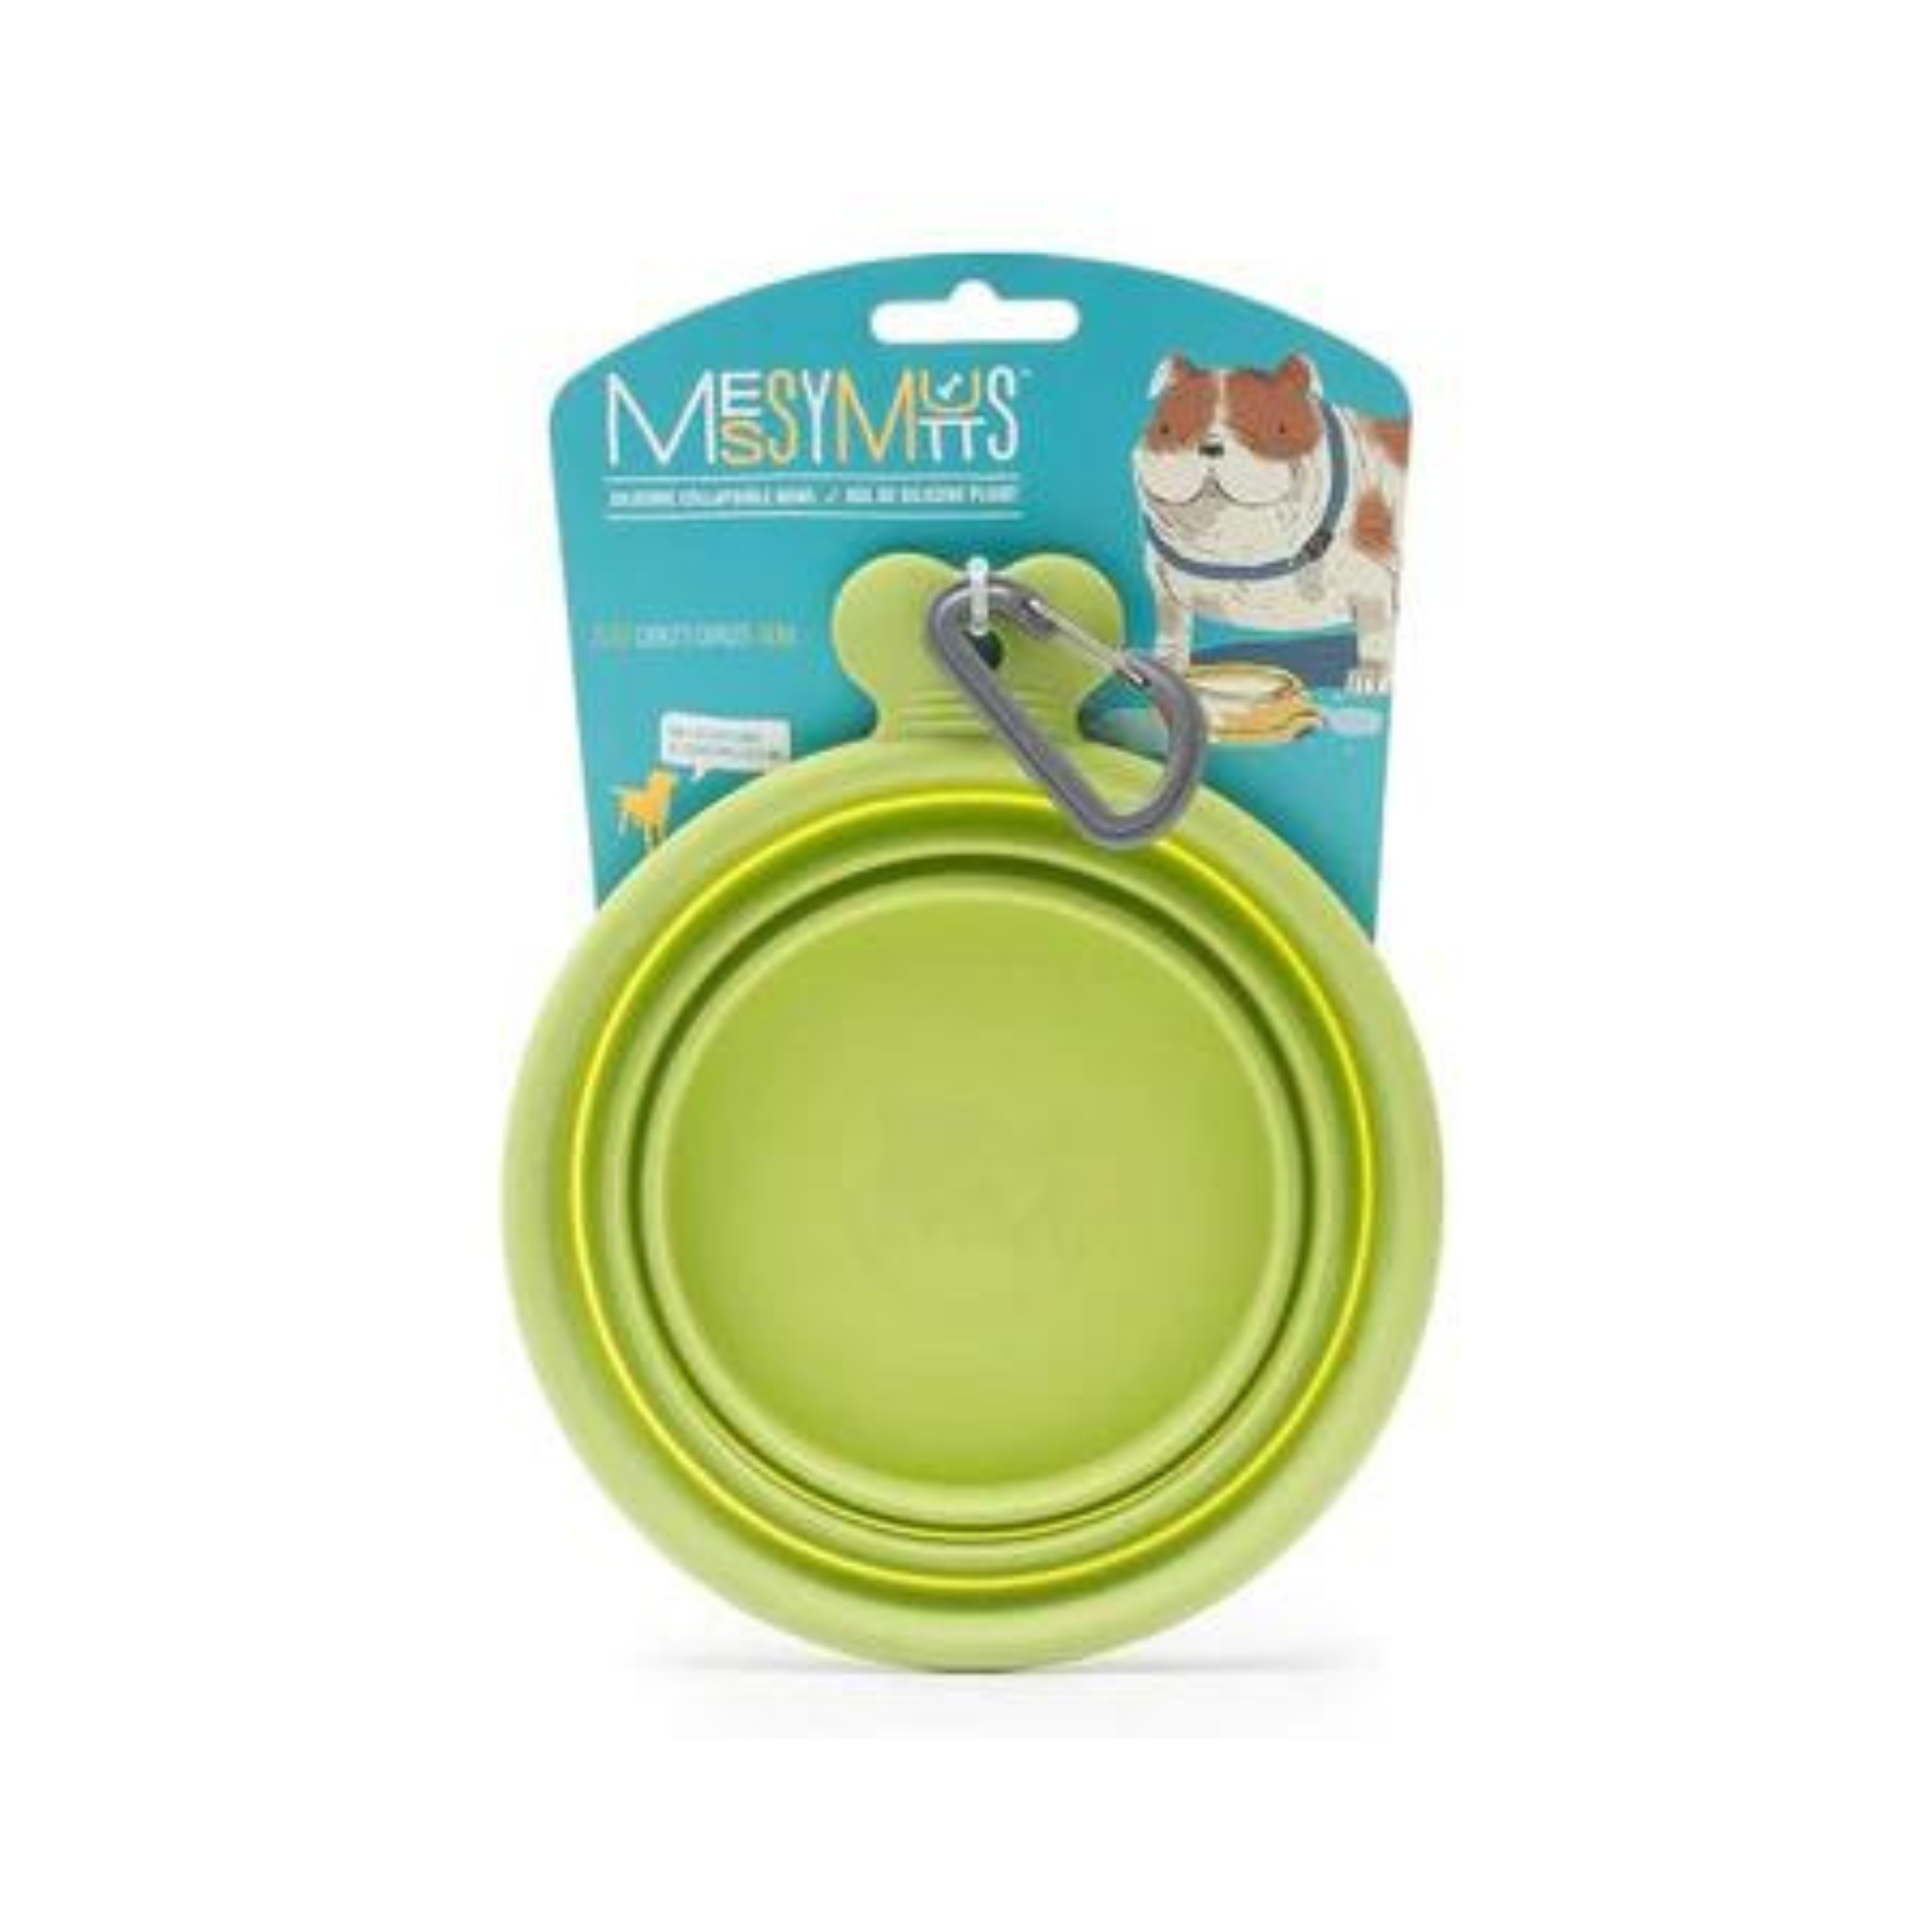 Messy Mutt's Collapsible Silicone 1.75 Cup Feeder Bowl